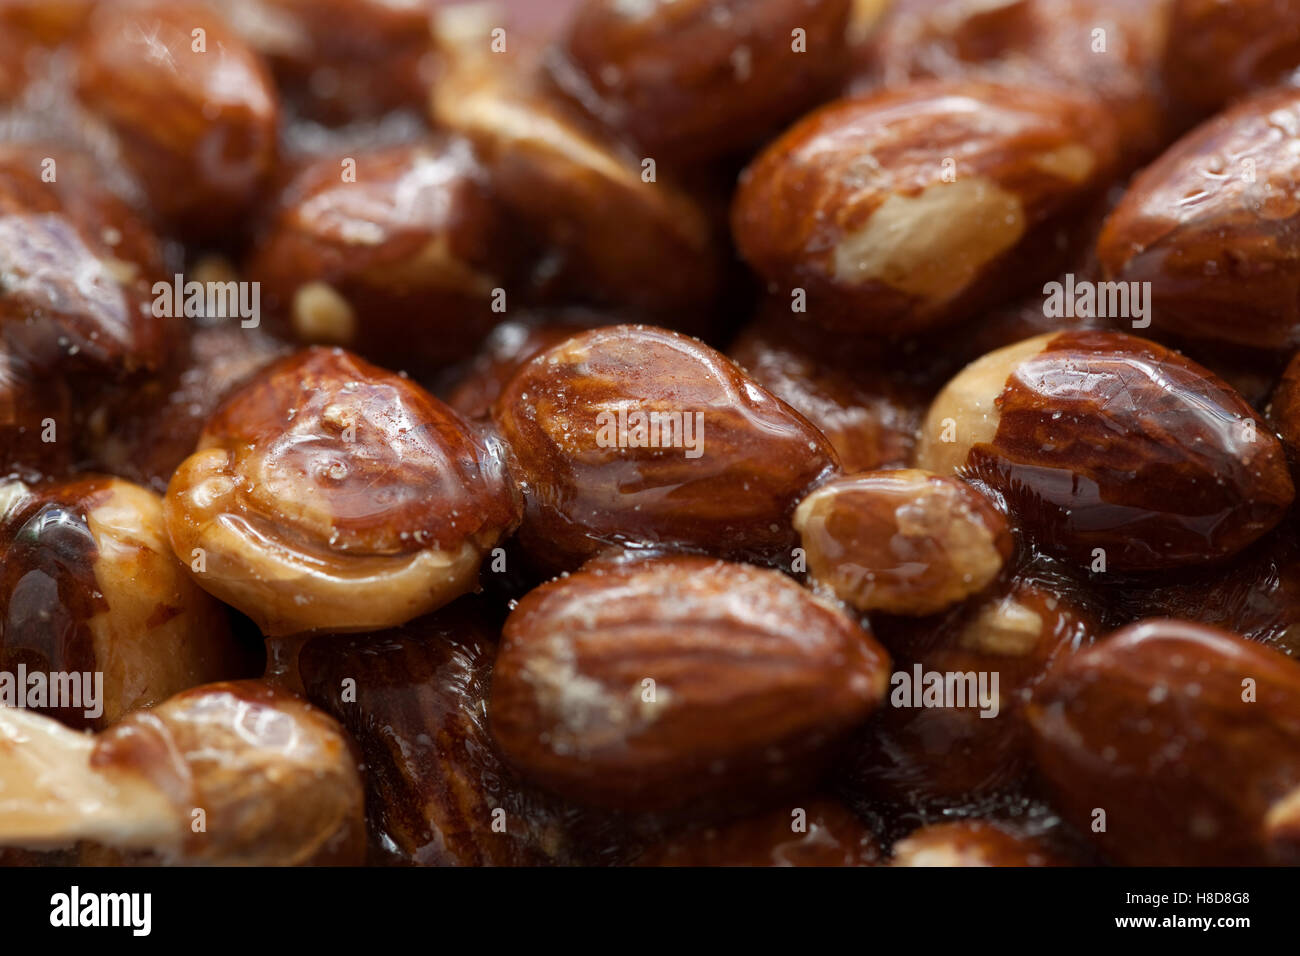 the whole almonds in caramel as background Stock Photo